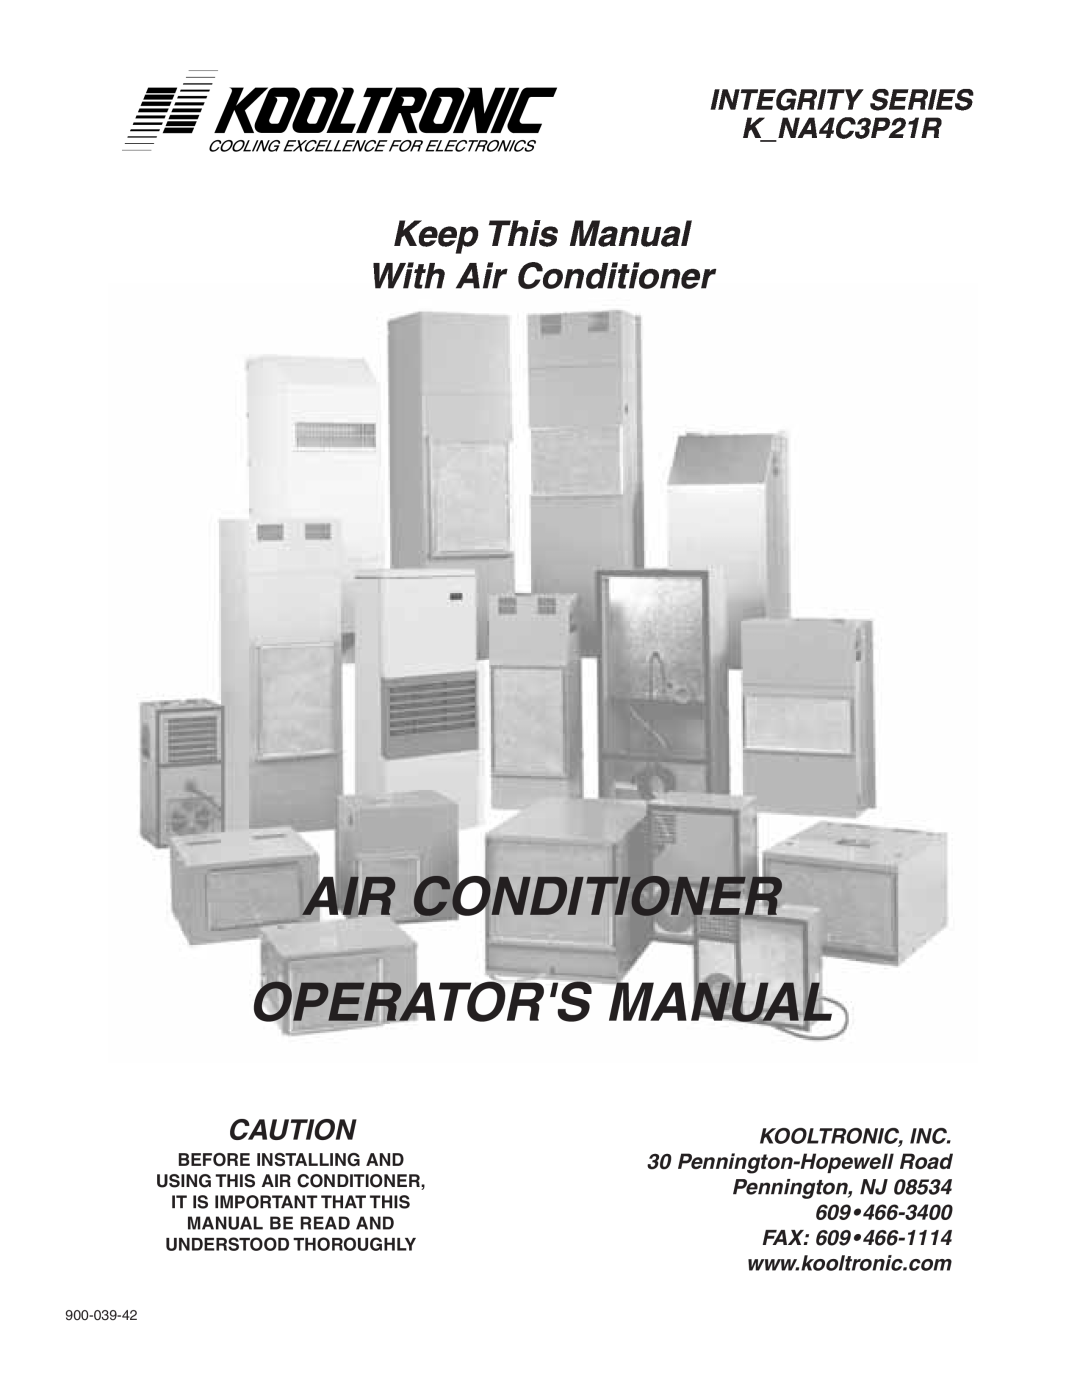 Event electronic K_NA4C3P21R manual Keep This Manual With Air Conditioner, INTEGRITY SERIES K NA4C3P21R, Kooltronic, Inc 